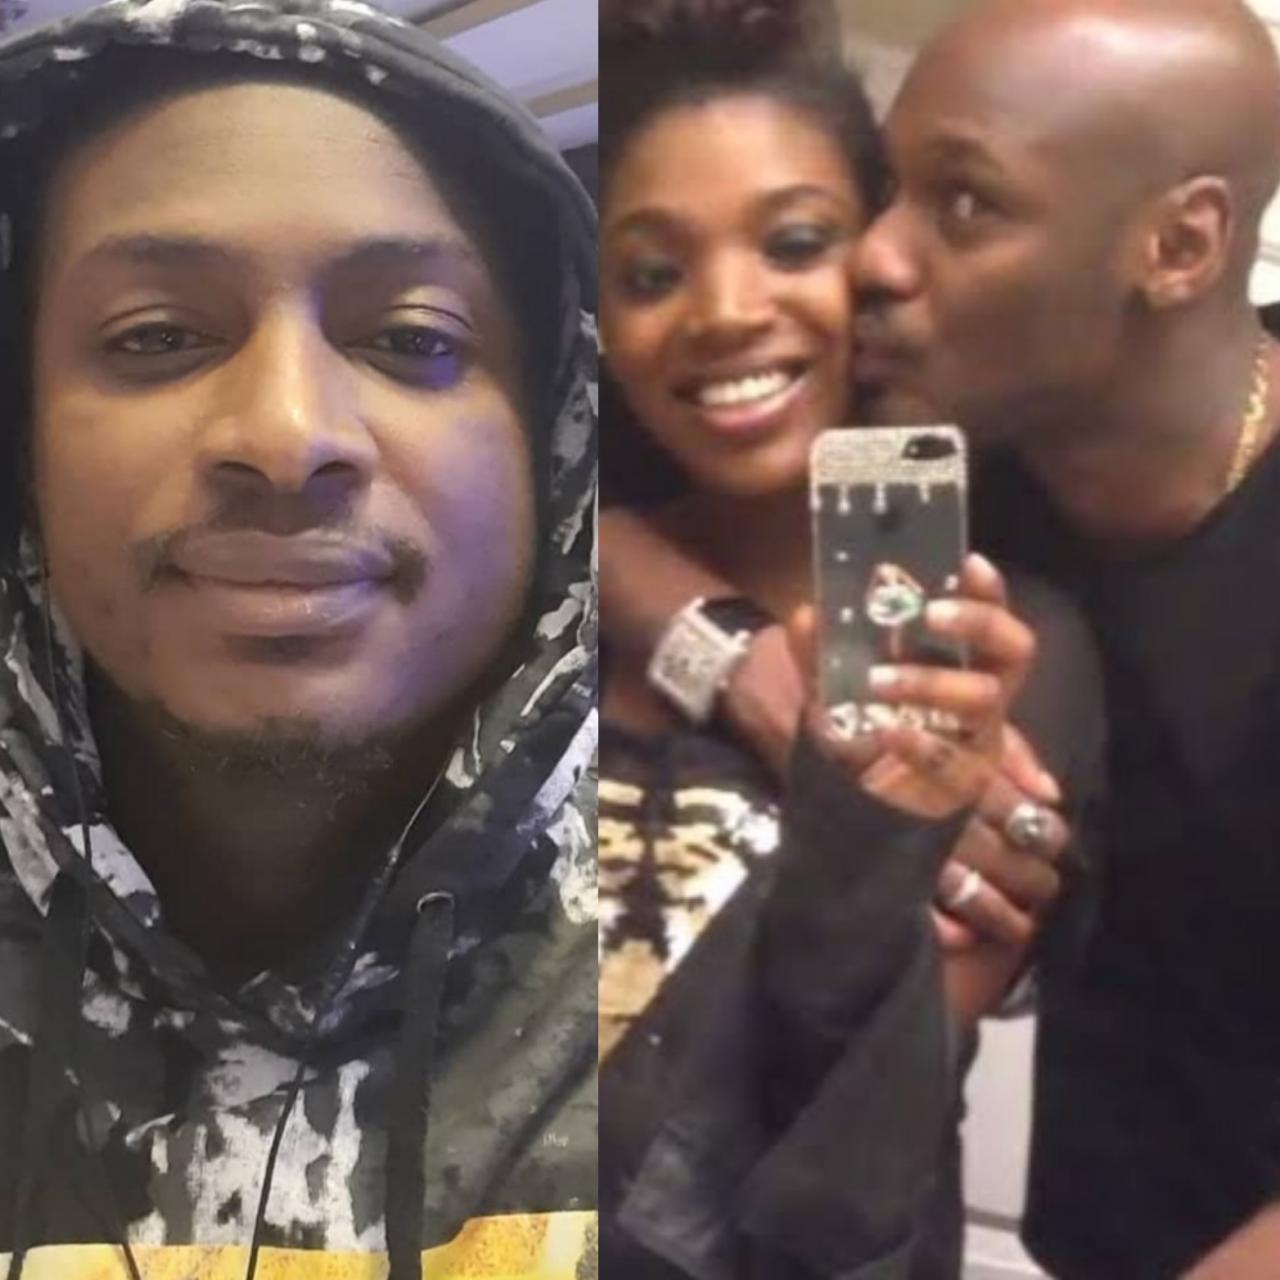 "Inno is dying slowly" Tuface Idibia